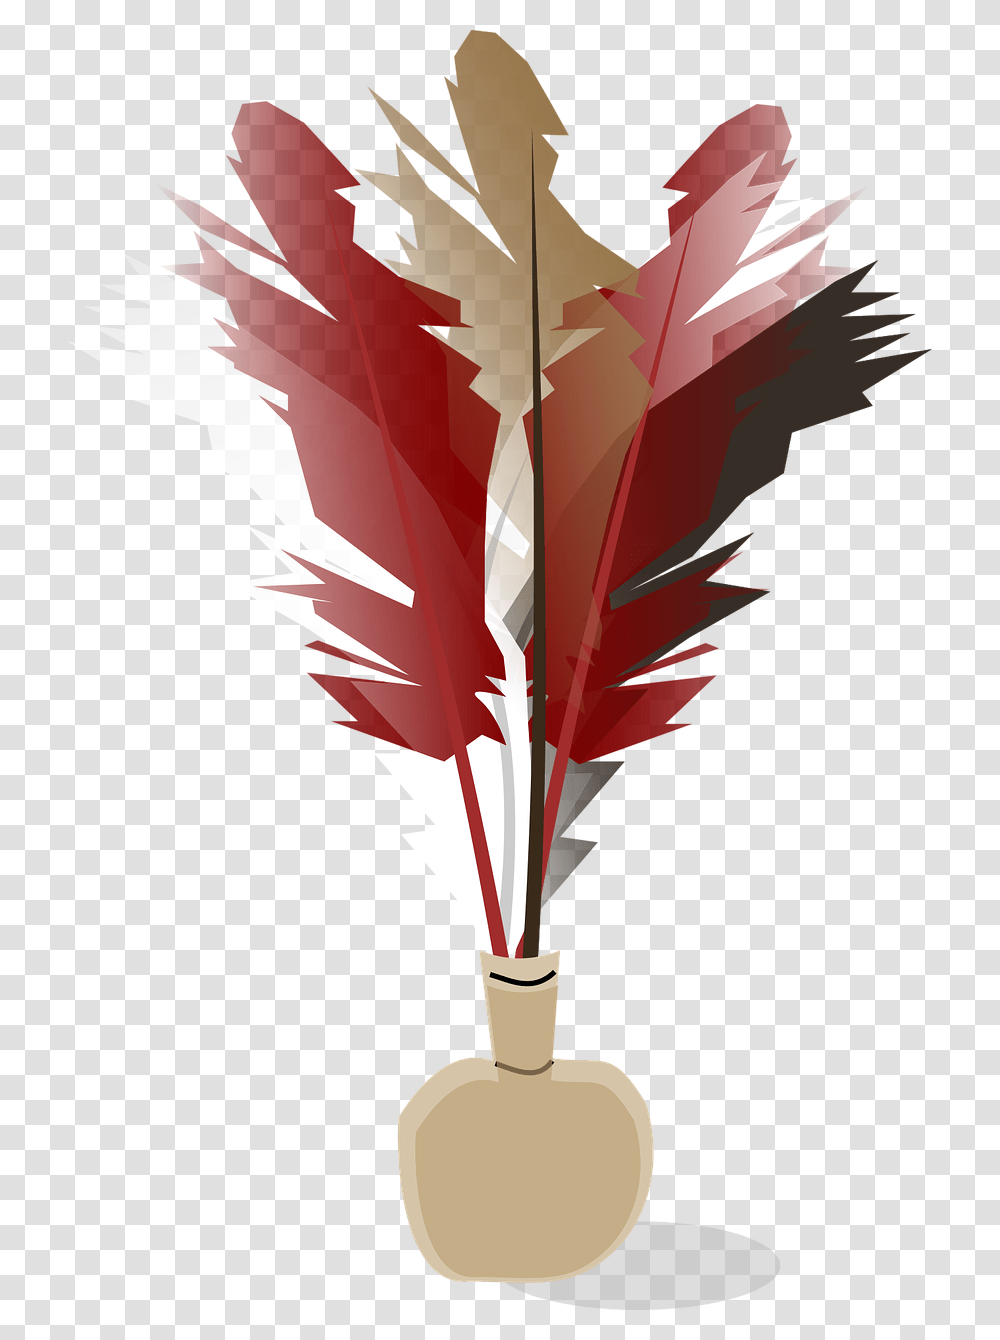 Red Feather Peteca, Leaf, Plant, Arrow Transparent Png